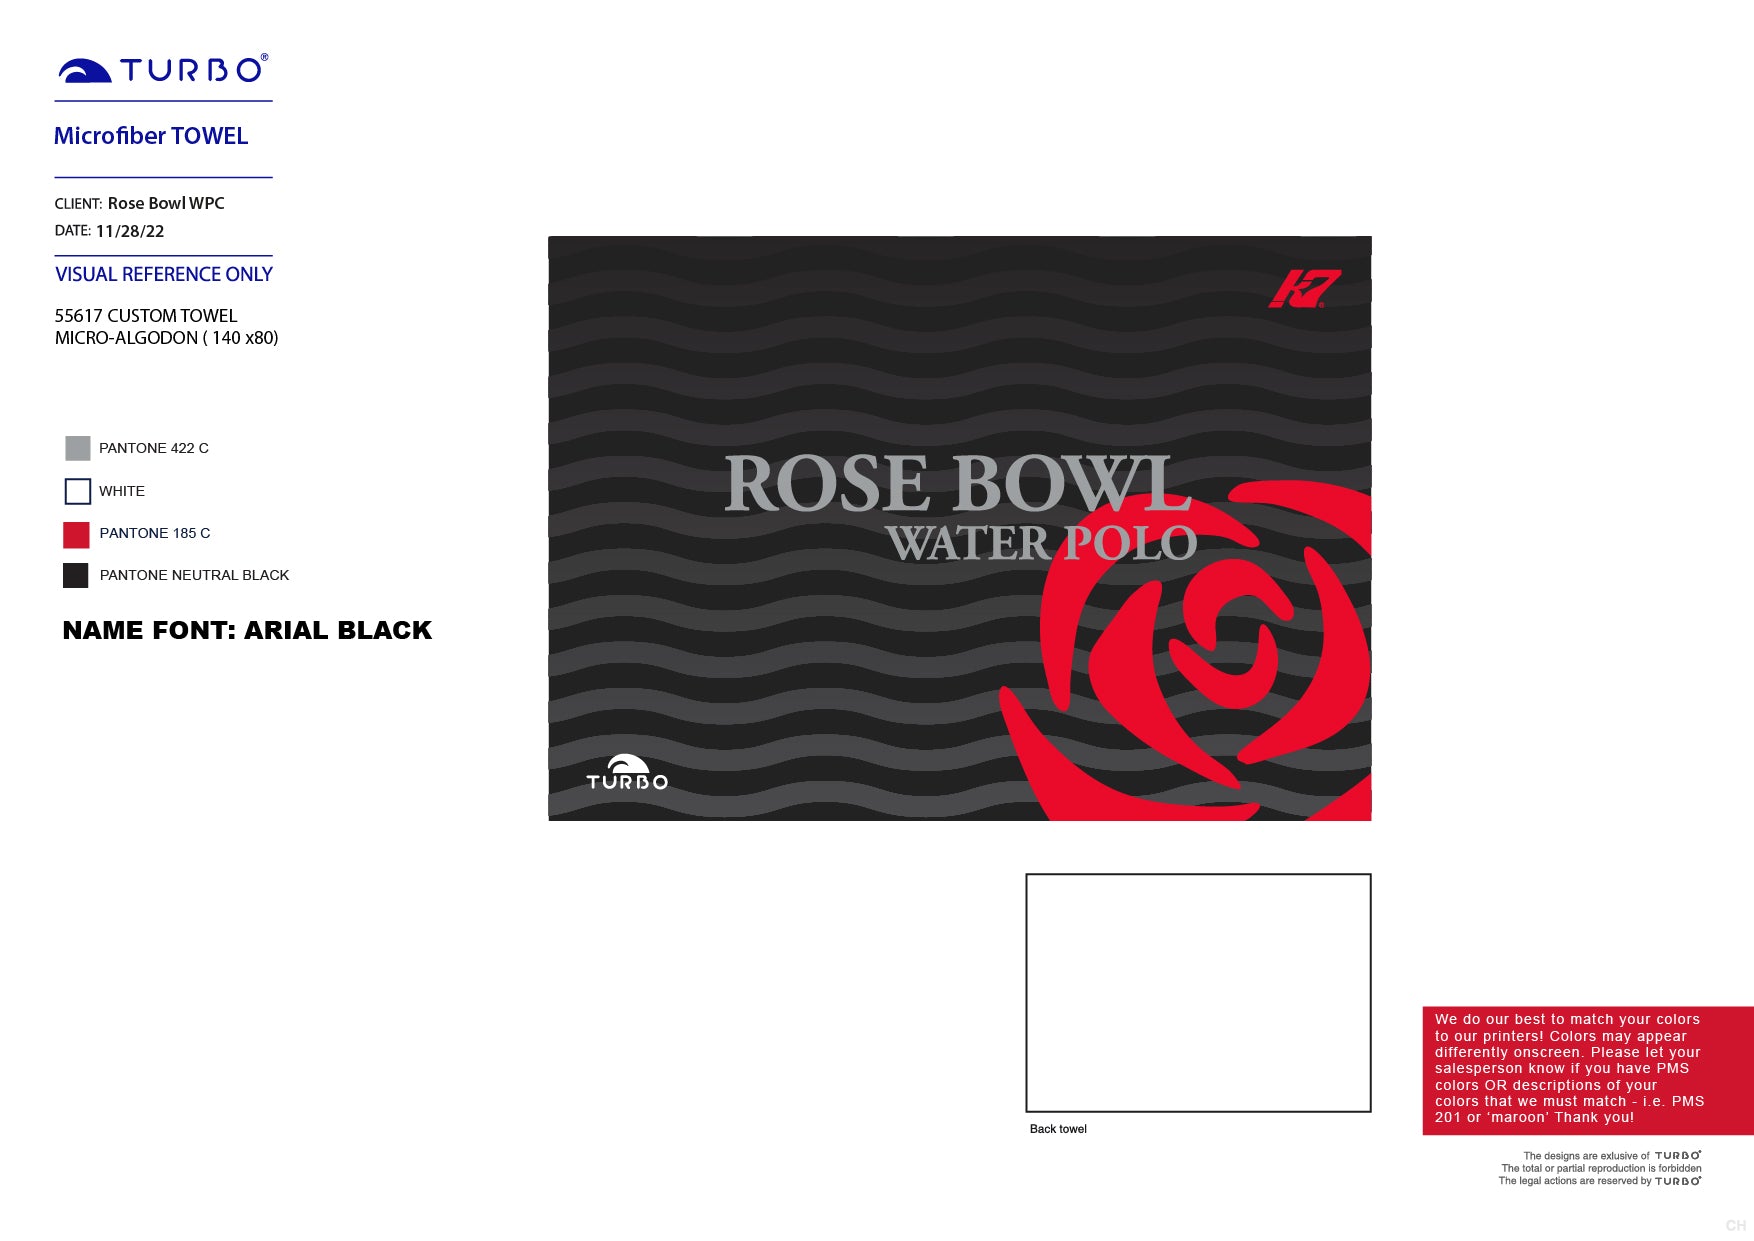 Rose Bowl Water Polo Club - Team Store - Towel